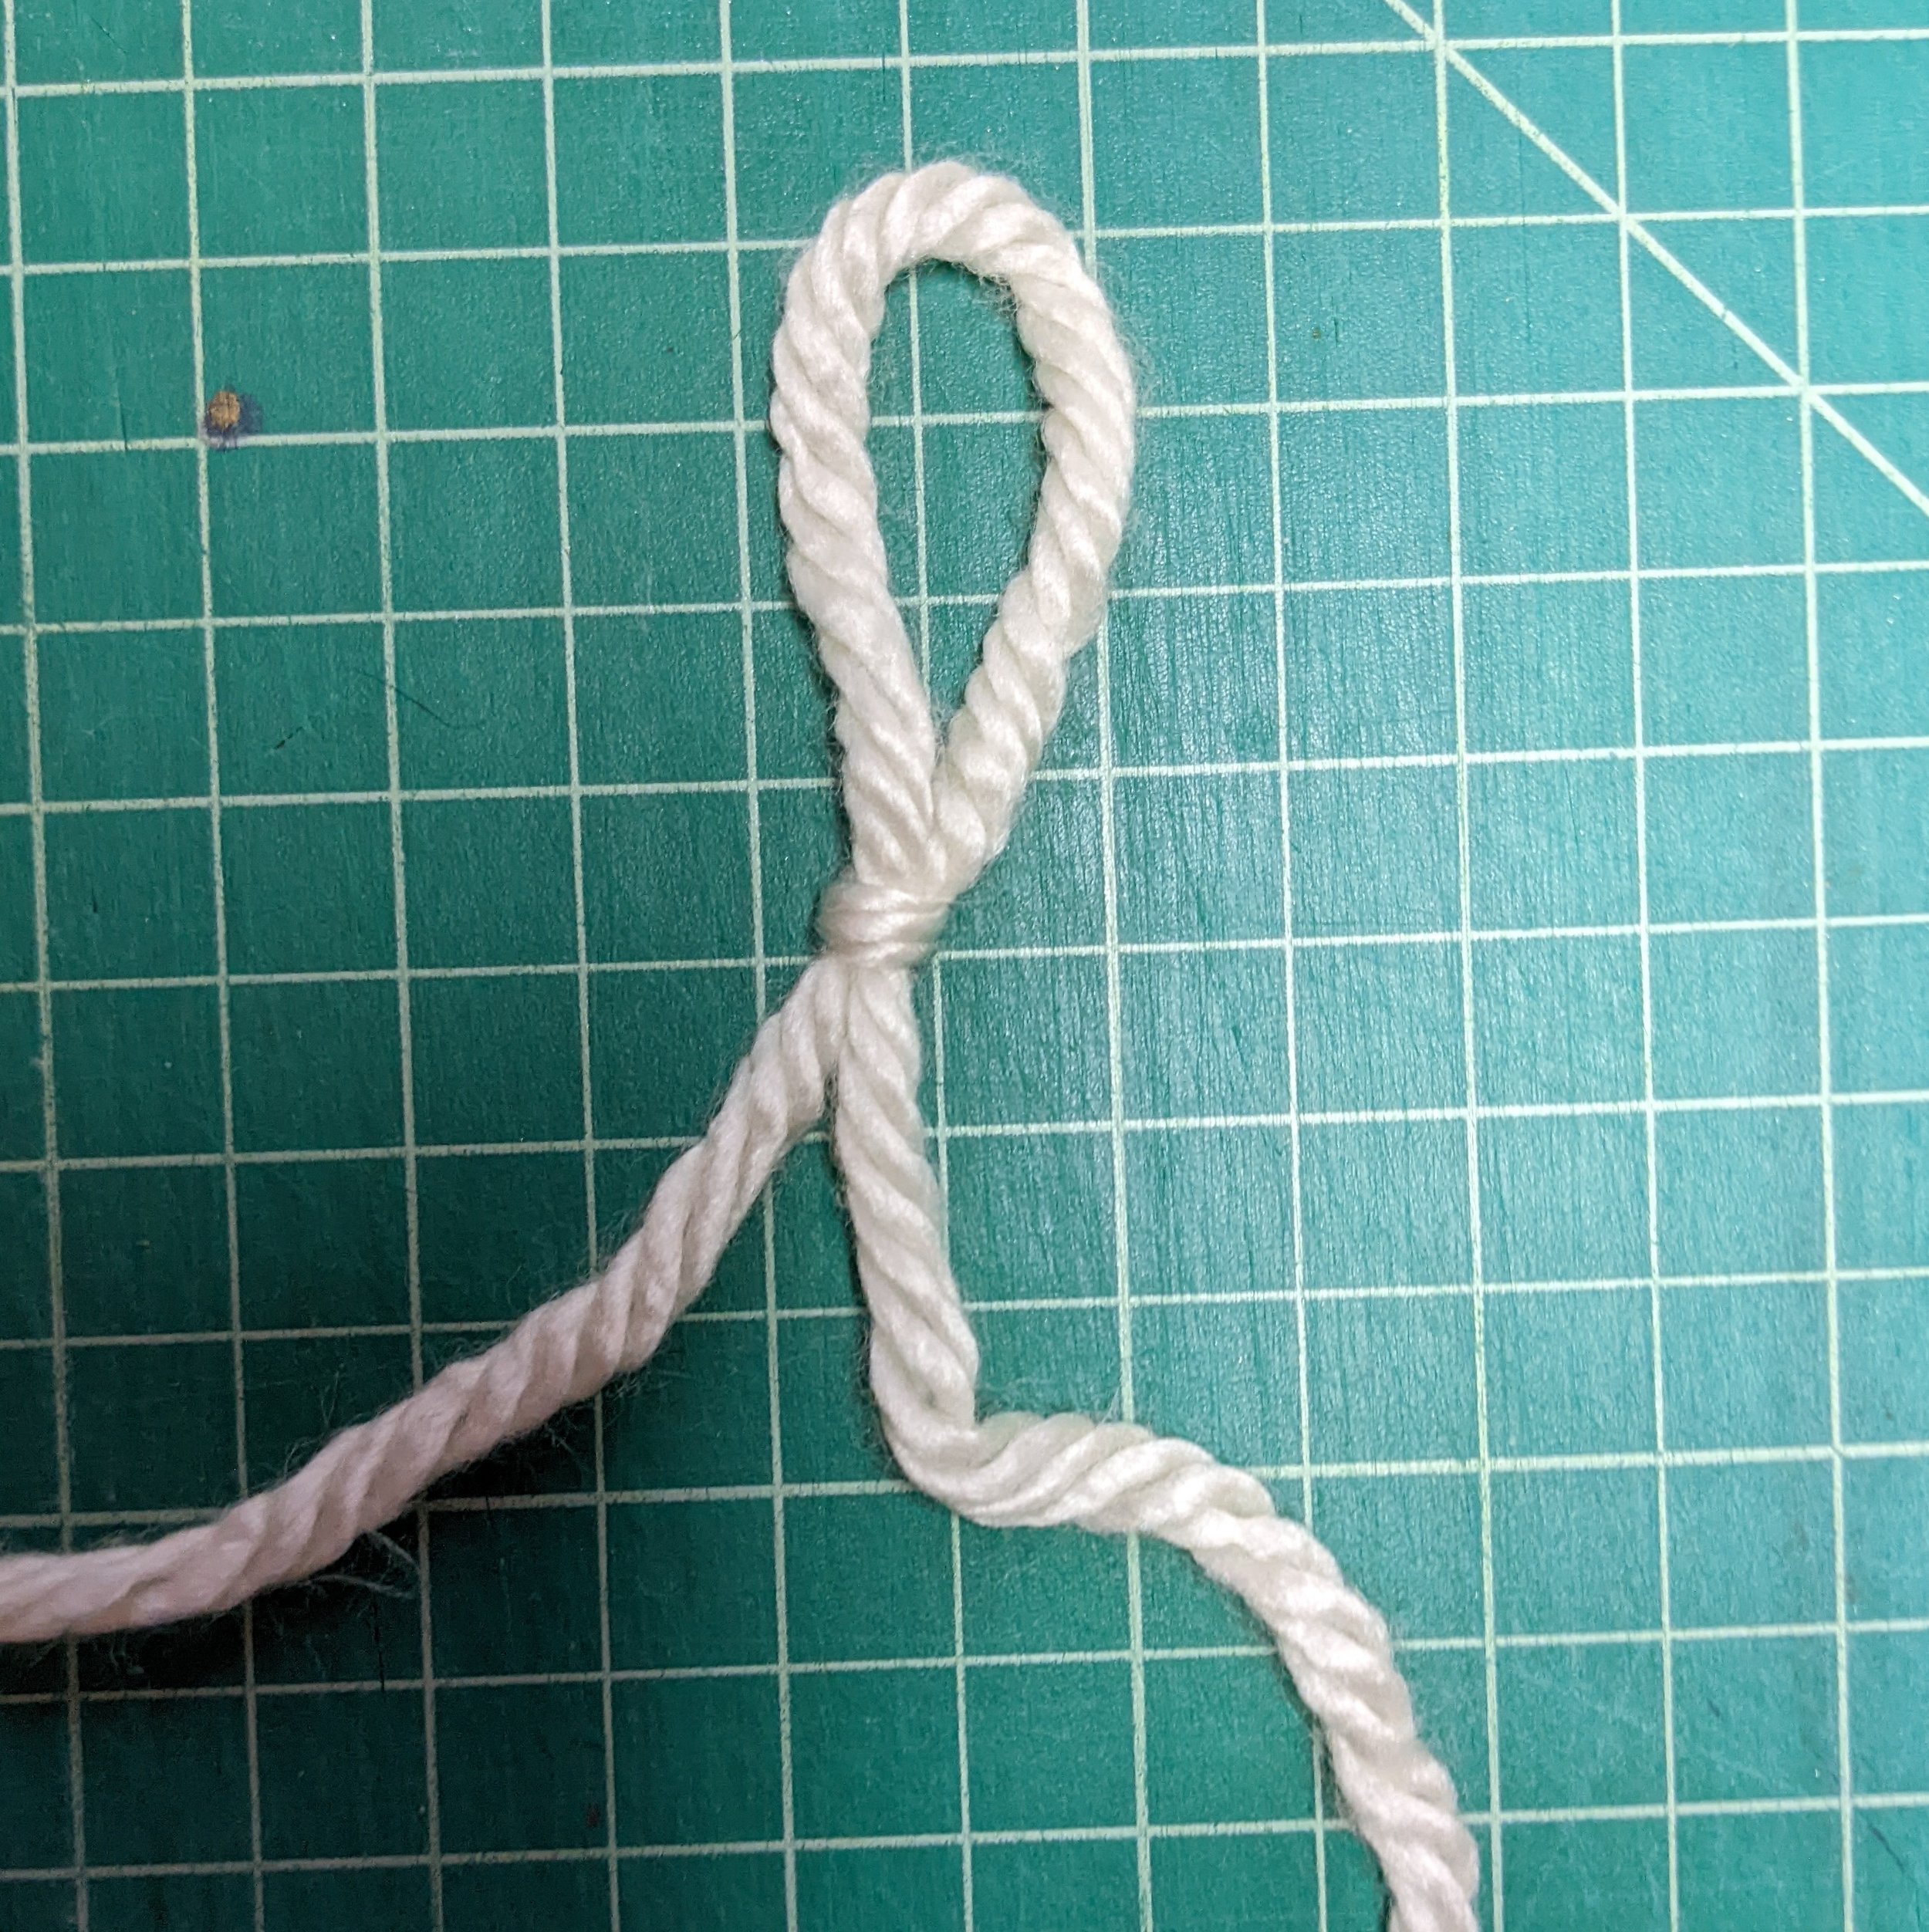 Step 7: Pull everything tight and you now have a slip knot!